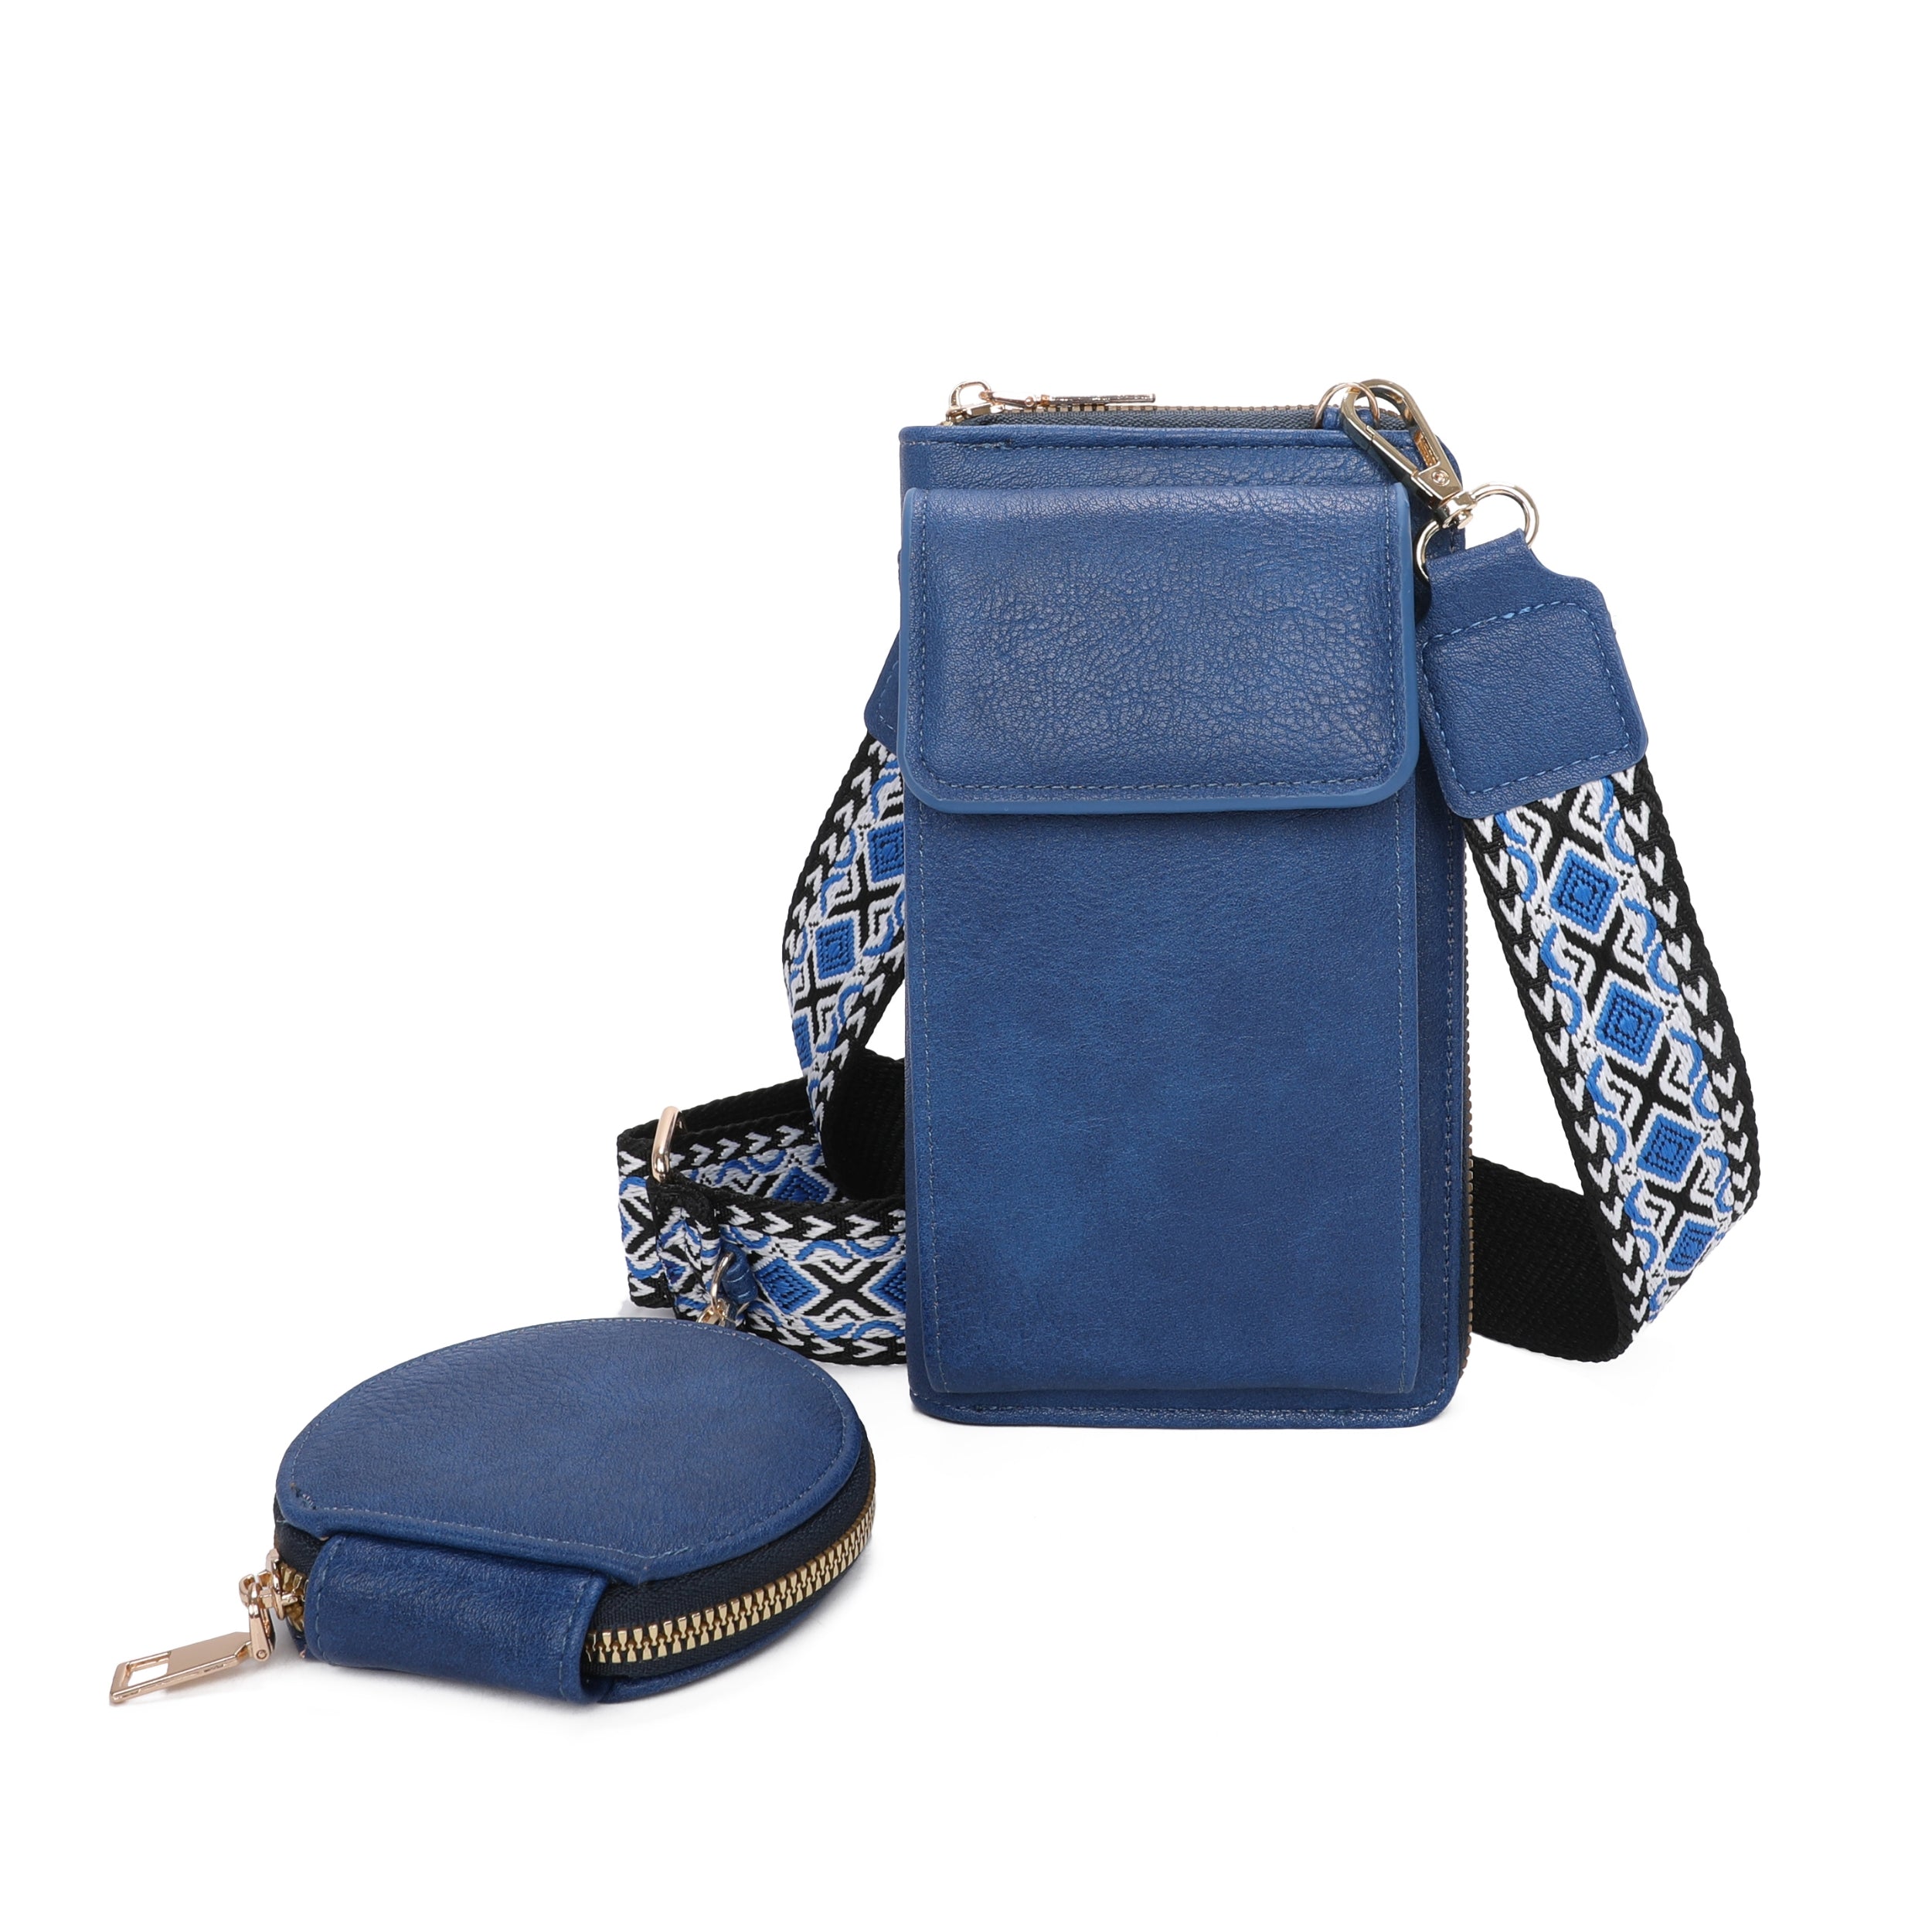 Craze London Crossbody bag with Phone Compartment